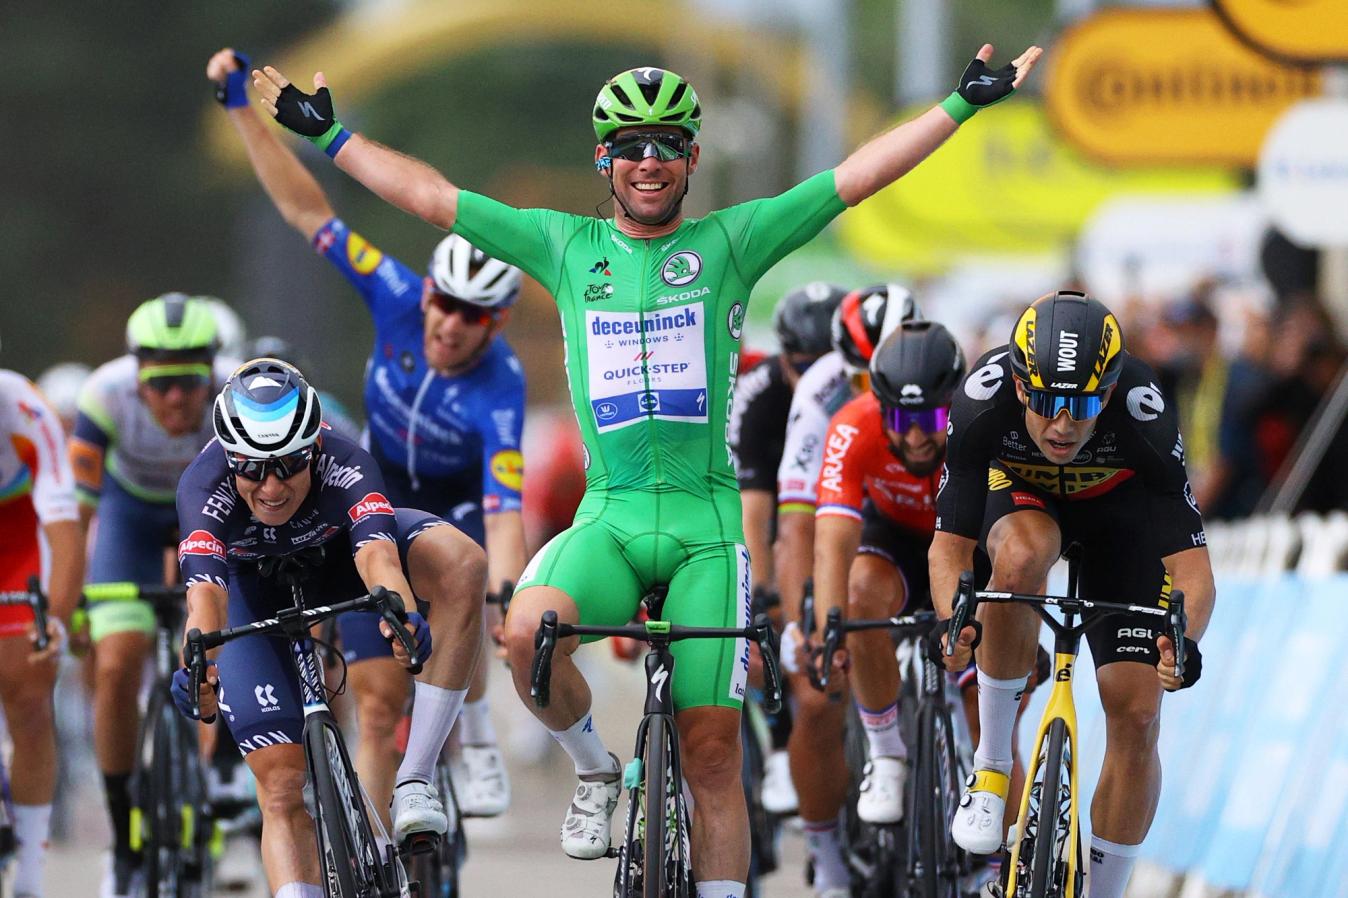 As Michael Mørkøv celebrates in the background, Mark Cavendish basks in the acclaim of winning stage 10 at the 2021 Tour de France